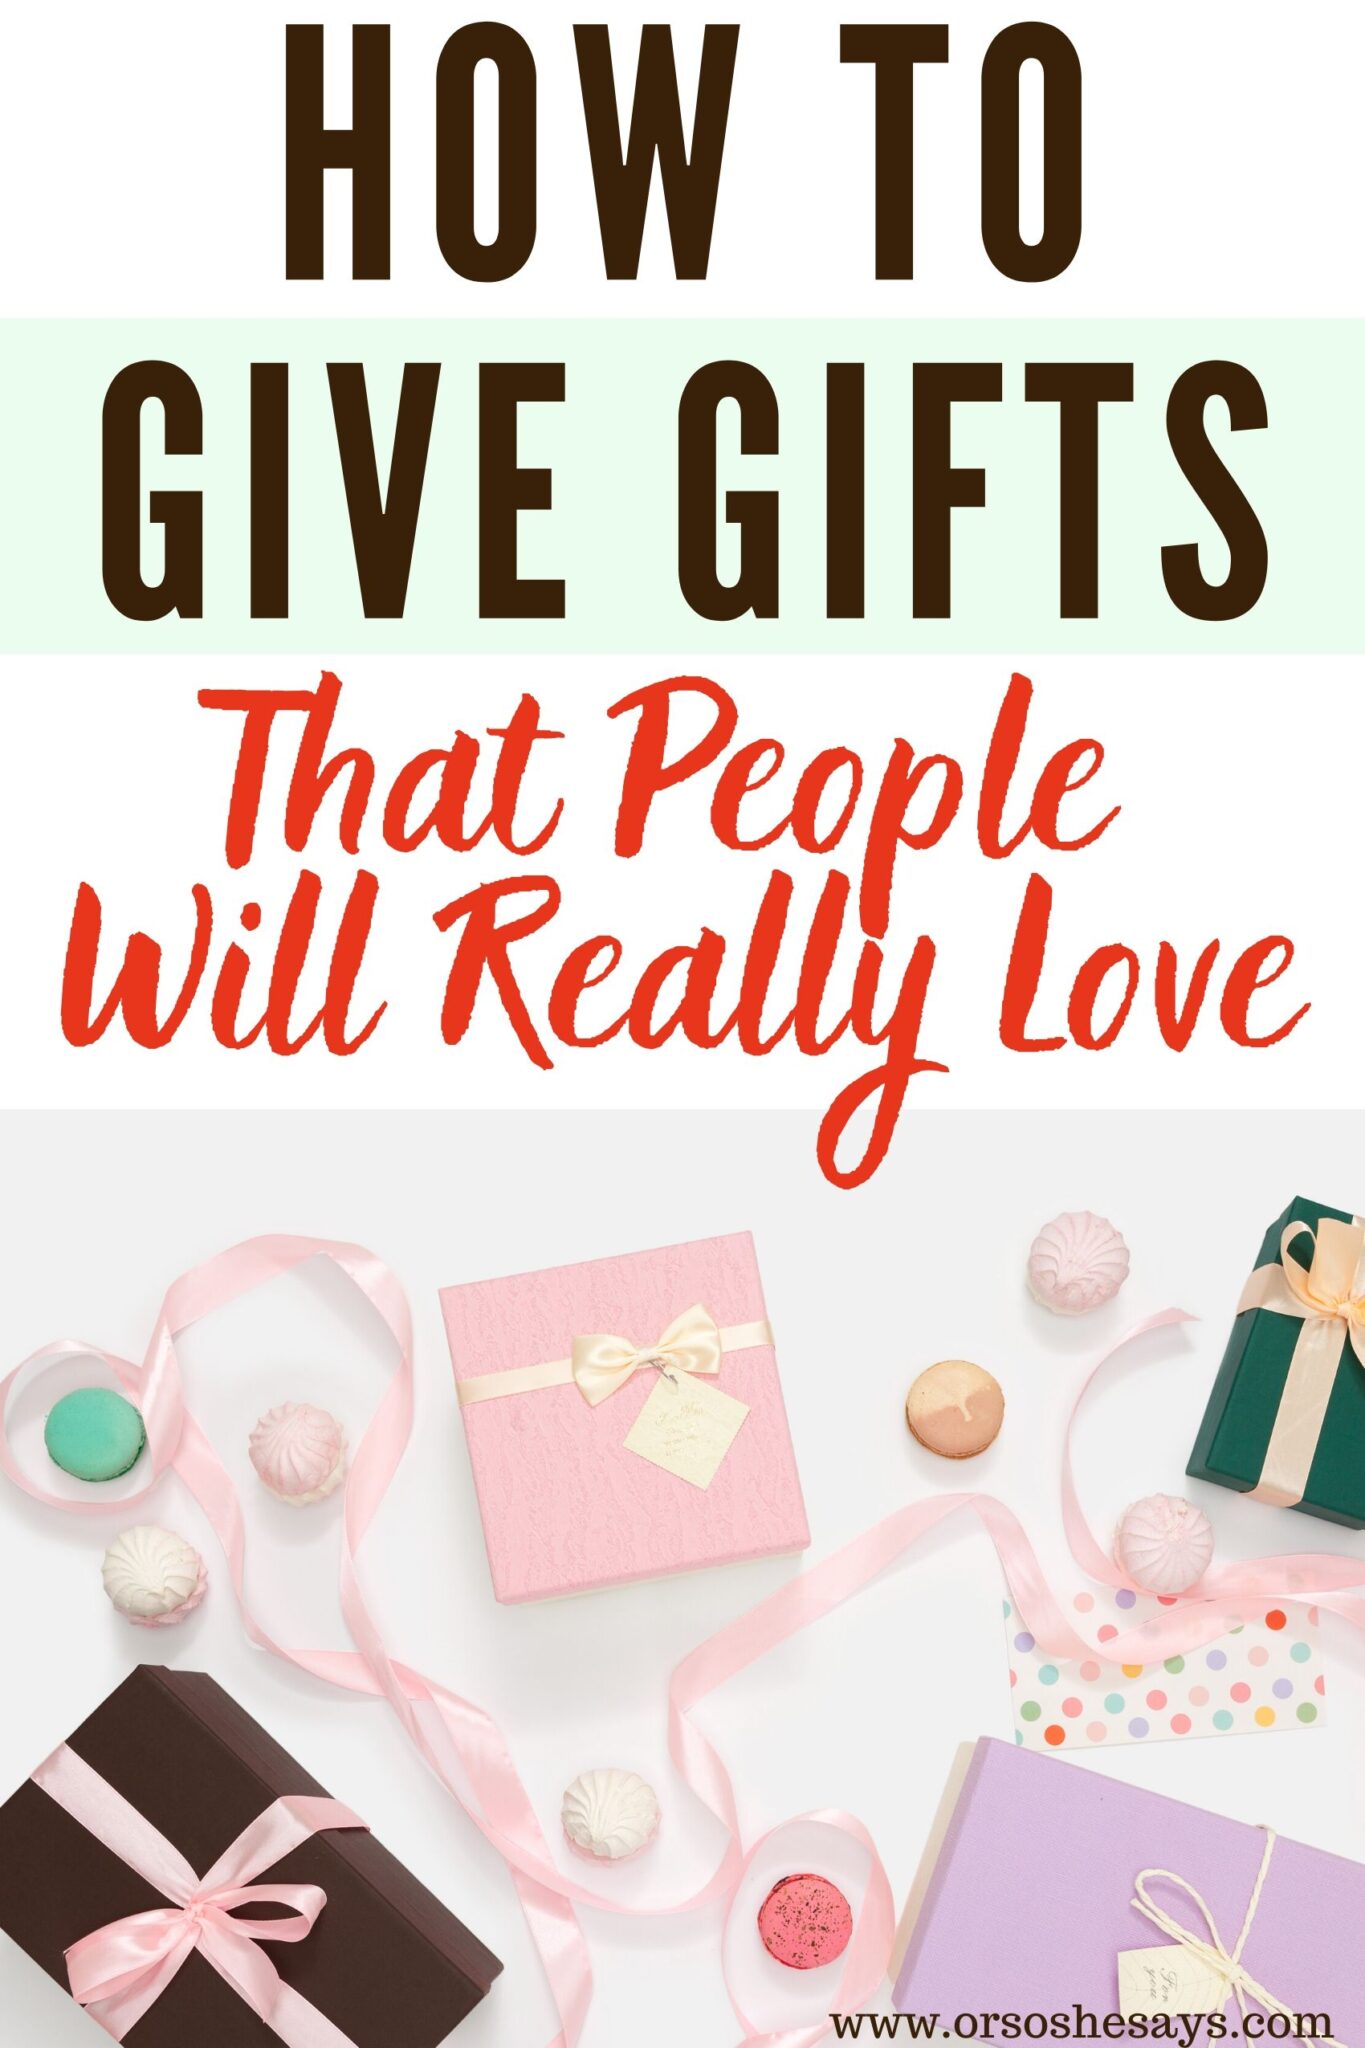 How to Think of Gift Ideas Your Recipient Will LOVE Or